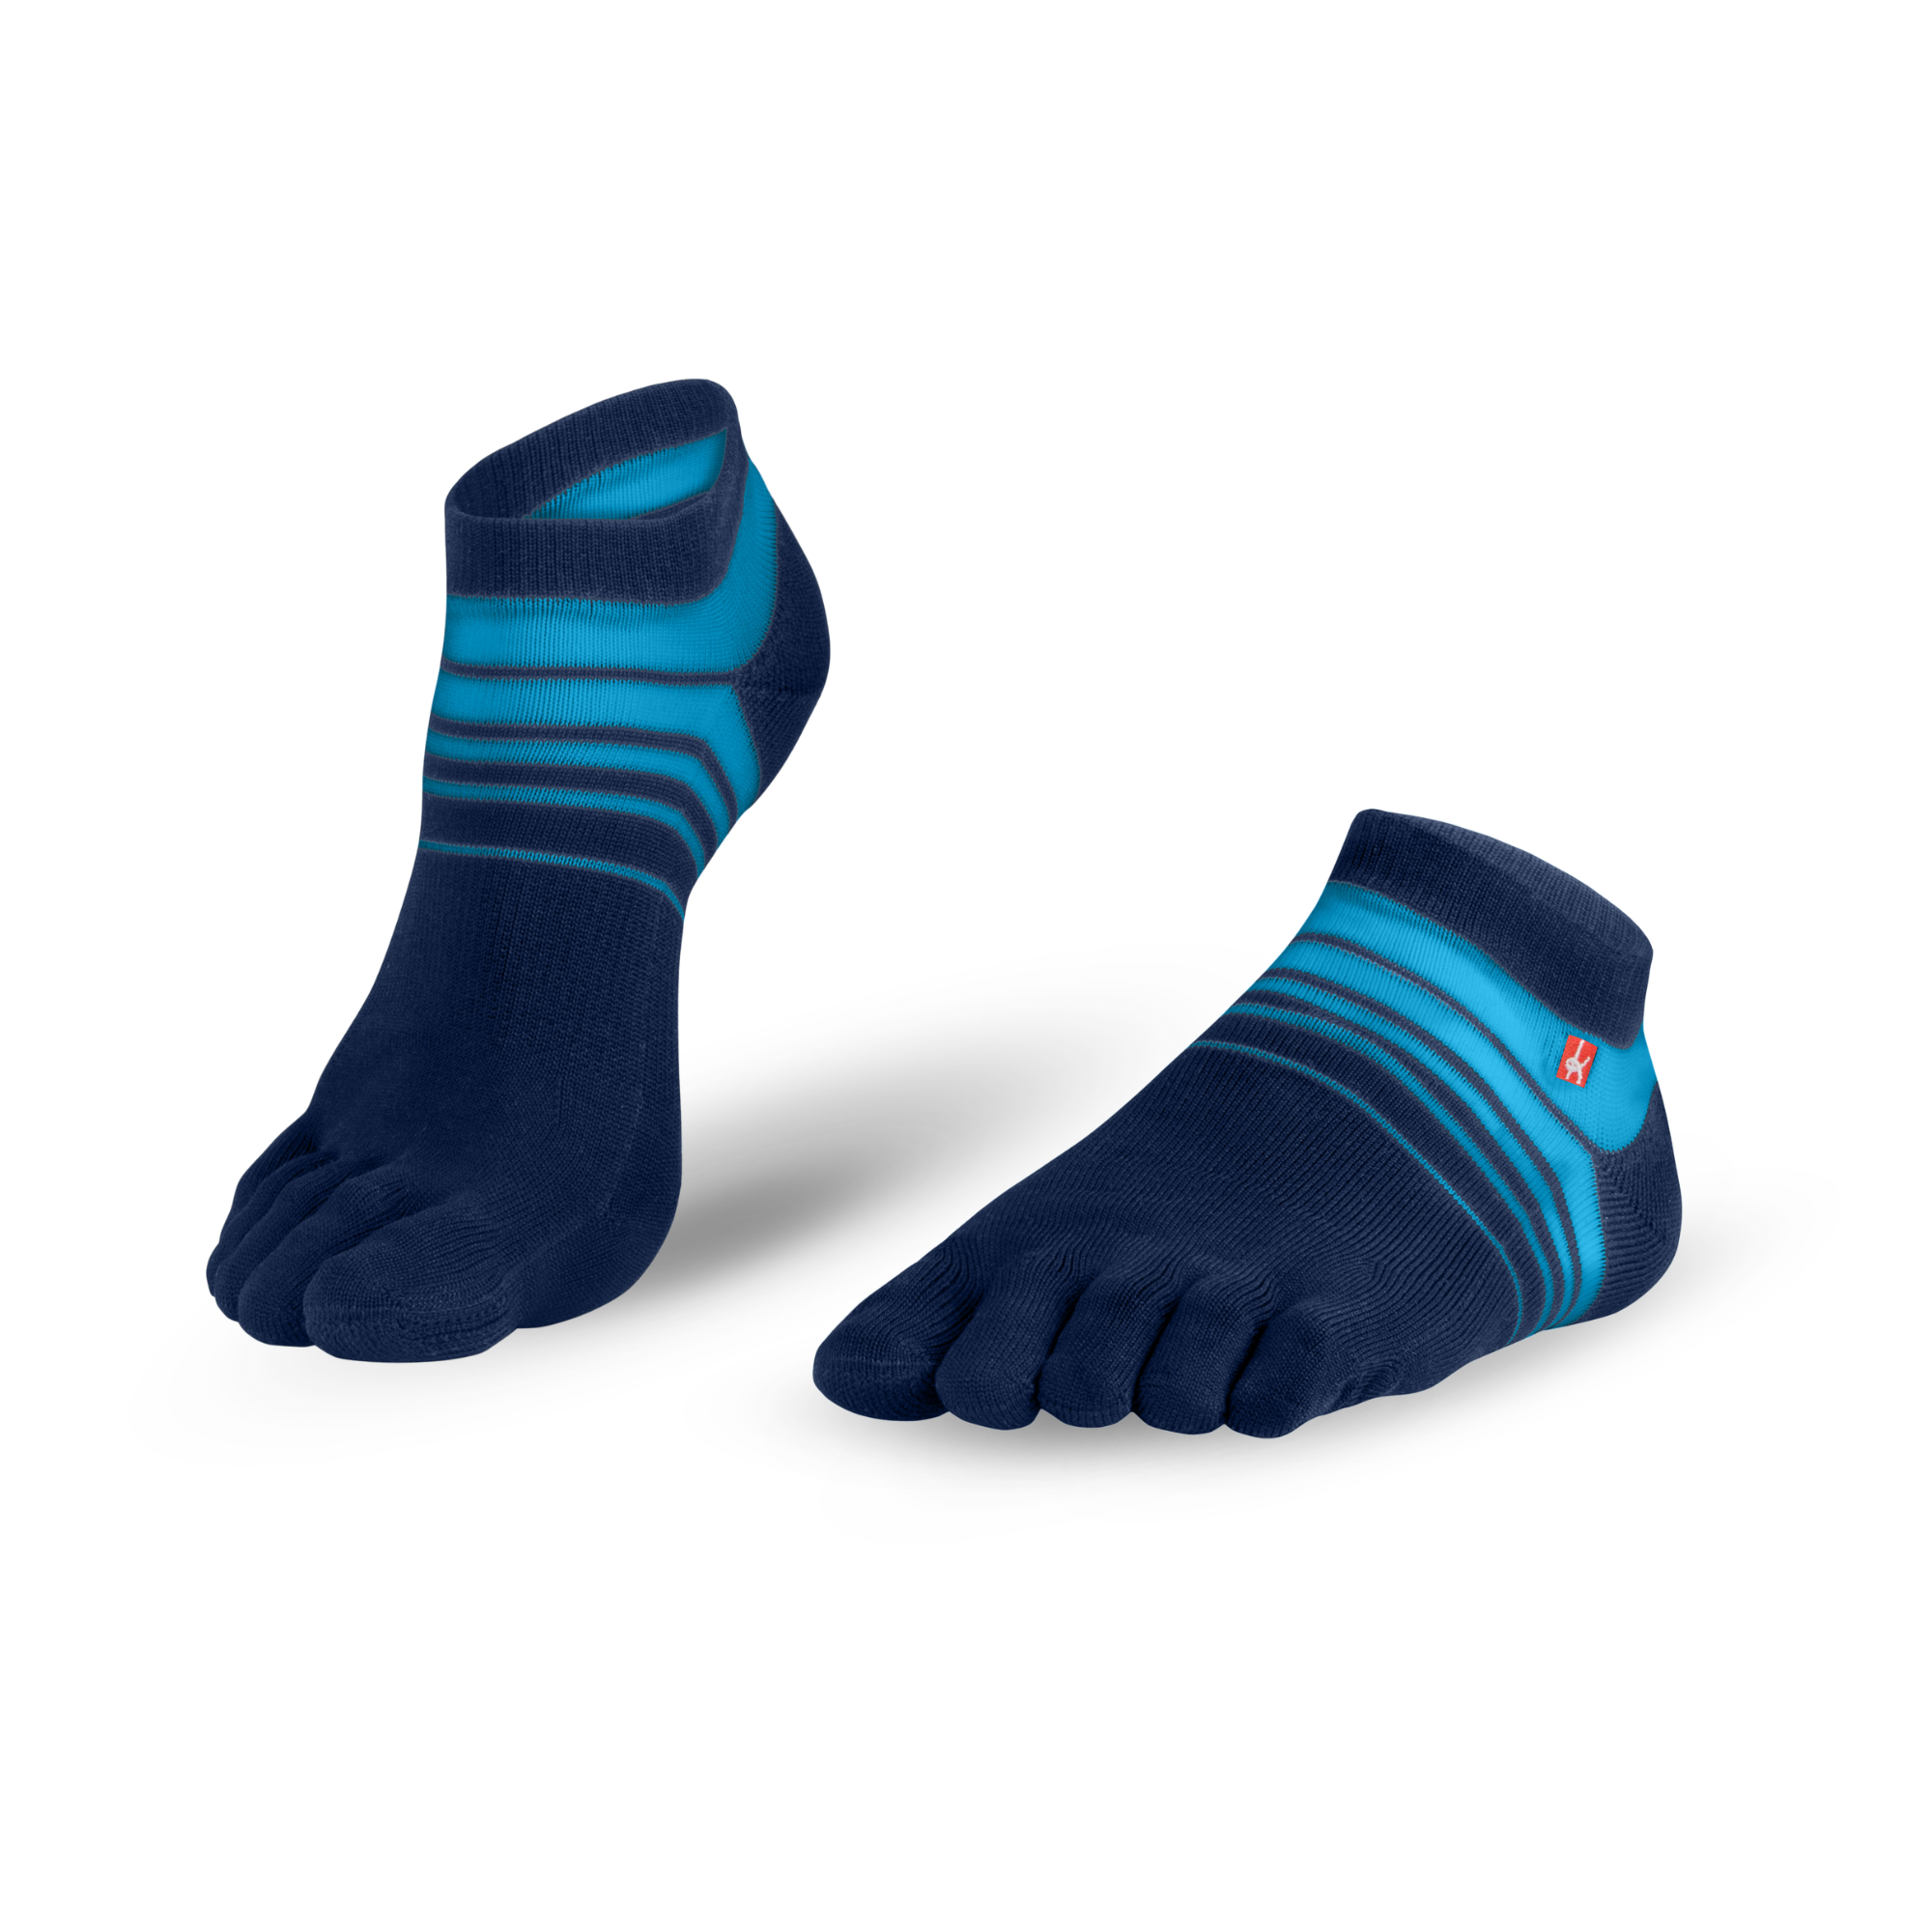 Lightweight toe socks for sport and leisure